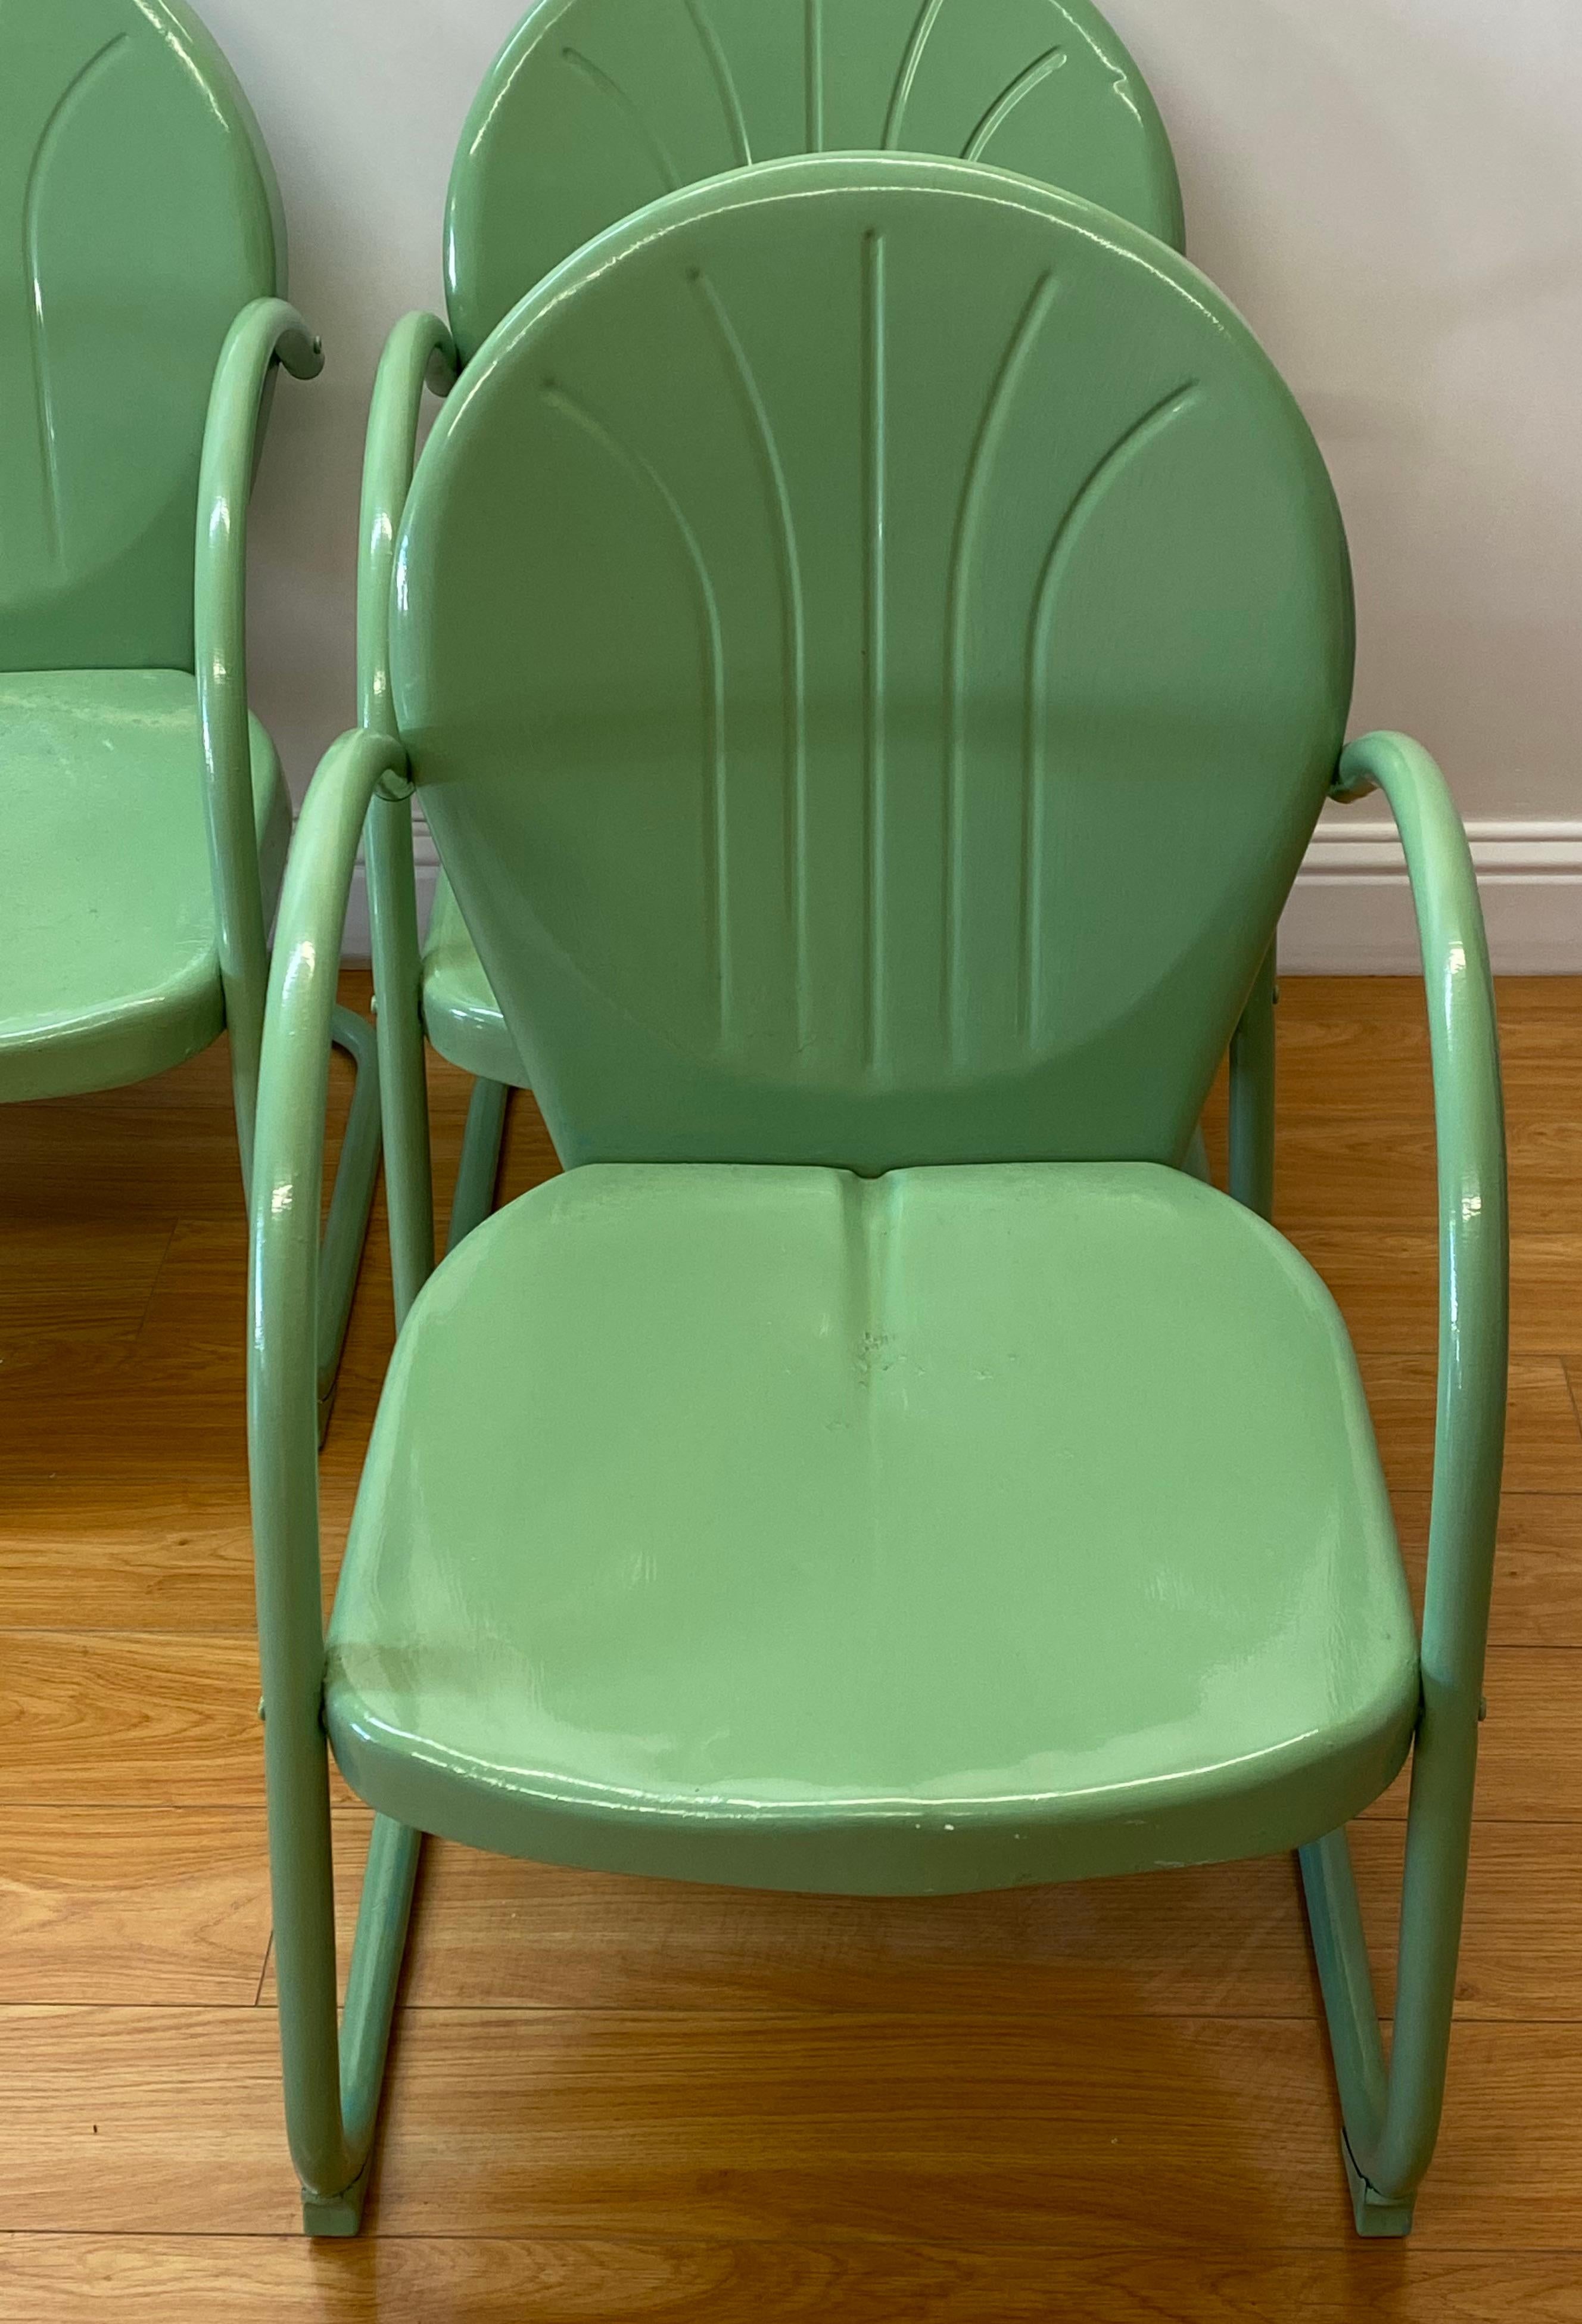 American Set of Four Vintage Mint Green Enameled Metal Patio Garden Chairs, C.1940s